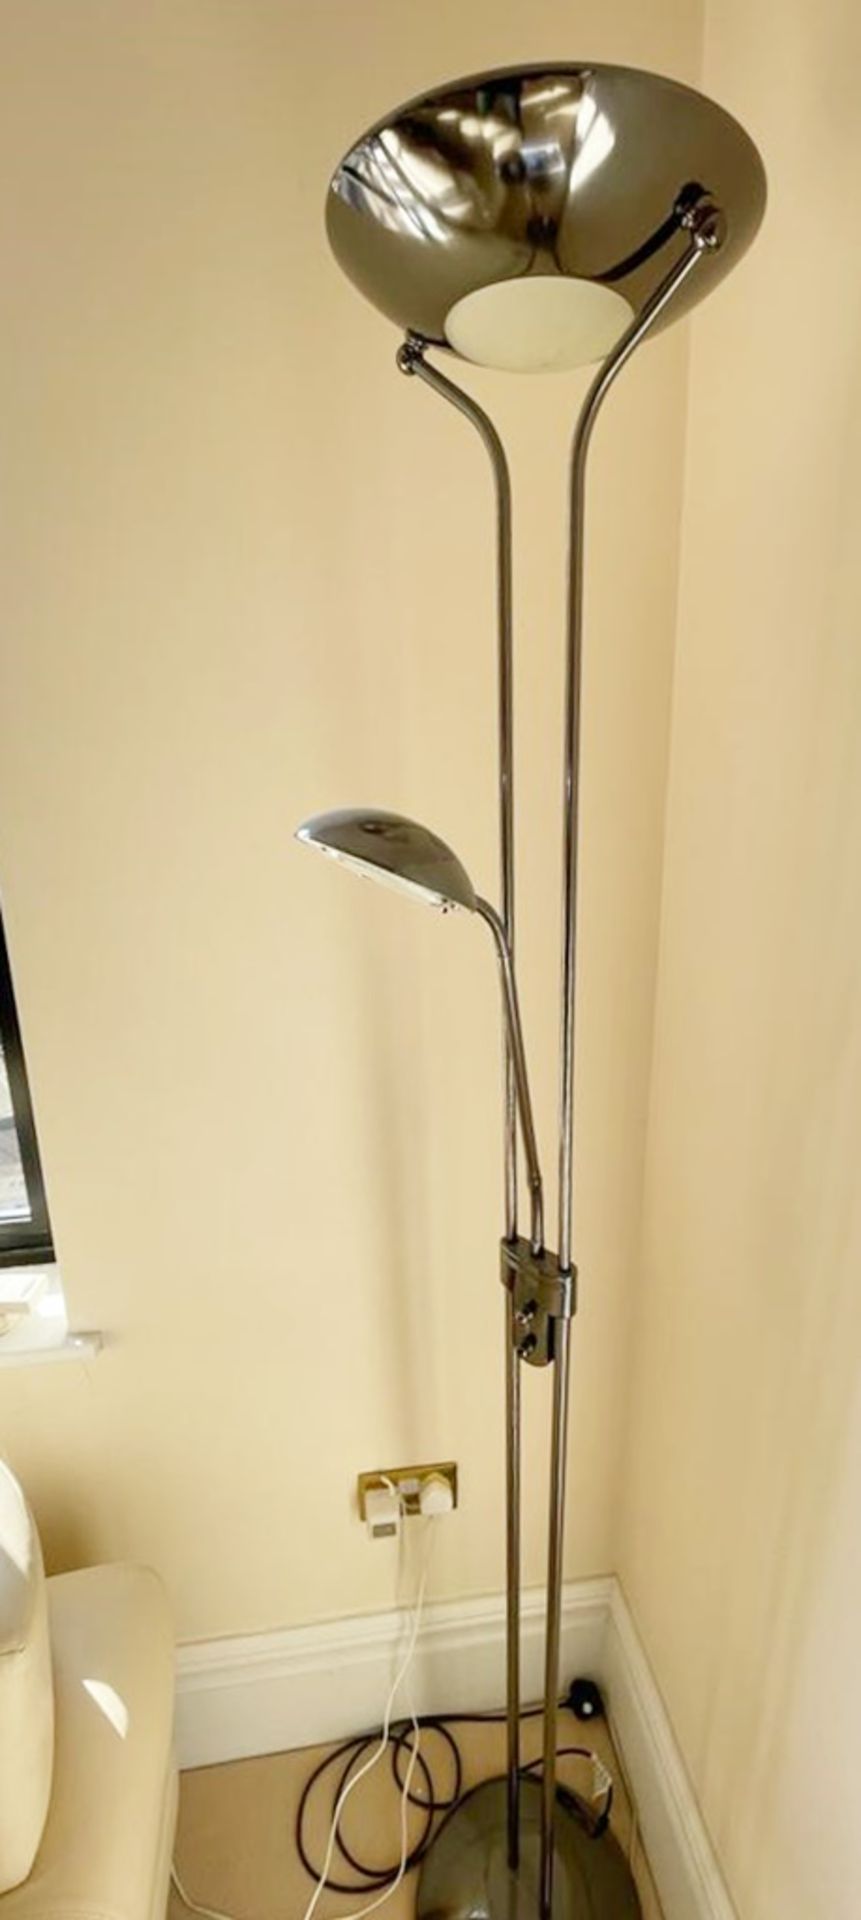 1 x Chrome Floor Lamp With Uplight and Reading Light - Approx Height 6ft - NO VAT ON THE HAMMER - - Image 2 of 3